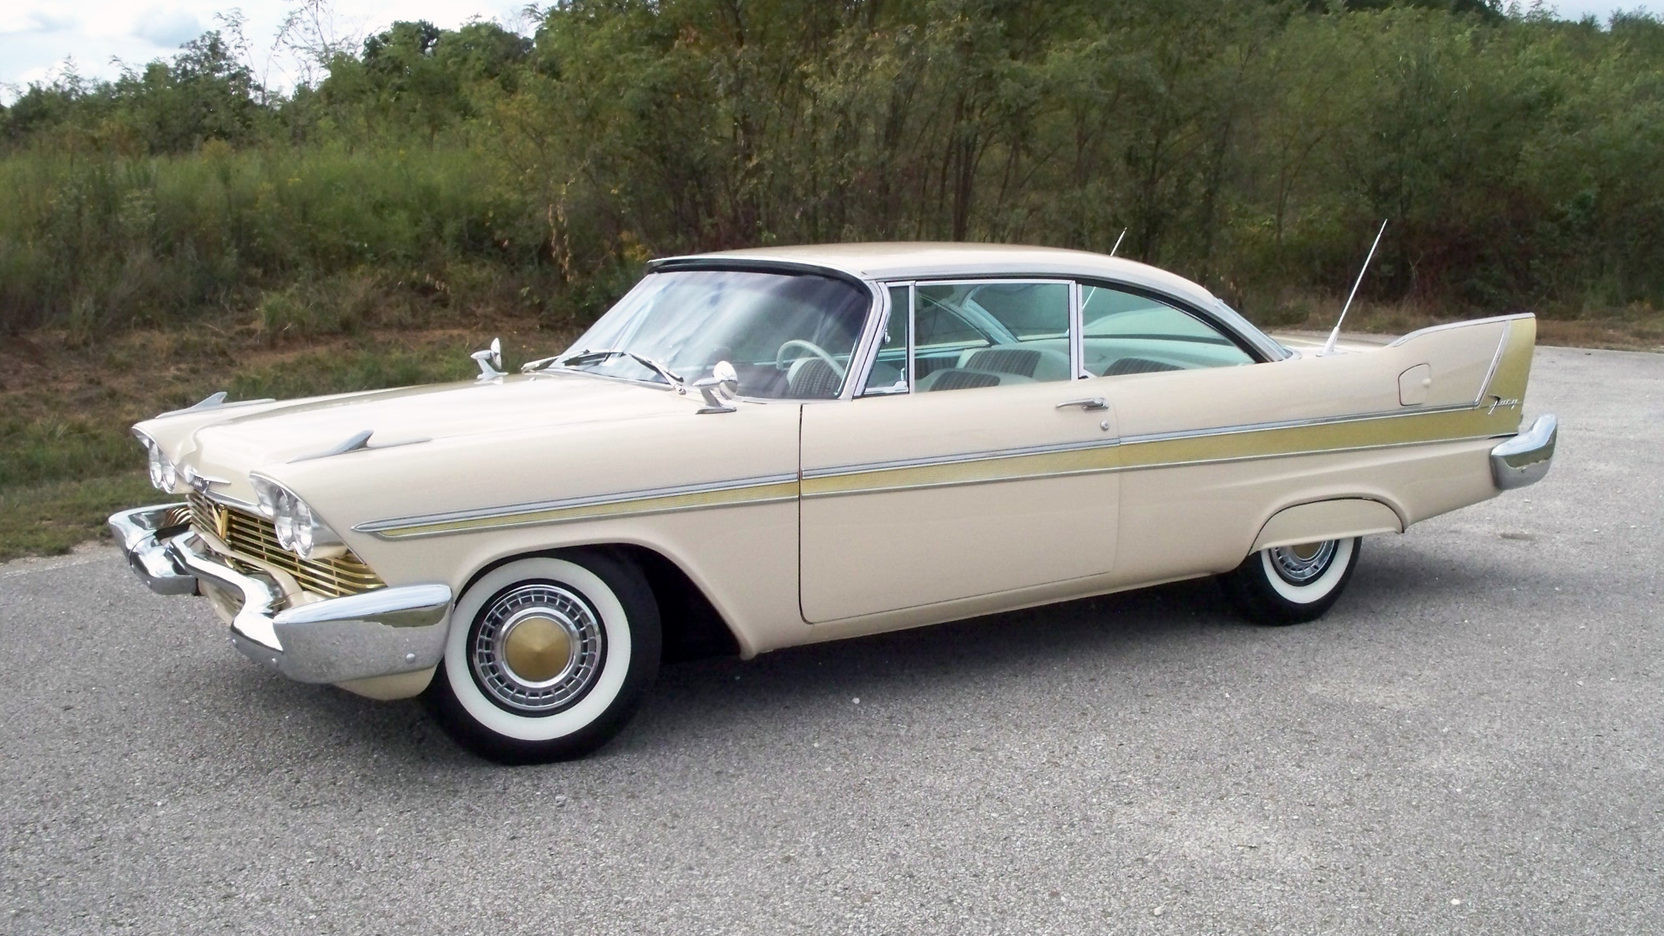 30 Best 1958 Plymouth Fury Pics To See,The Fury was a sub-series of the Plymouth Belvedere from 1956 through 1958. It was sold only as a sandstone white two-door hardtop with gold anodized aluminum trim